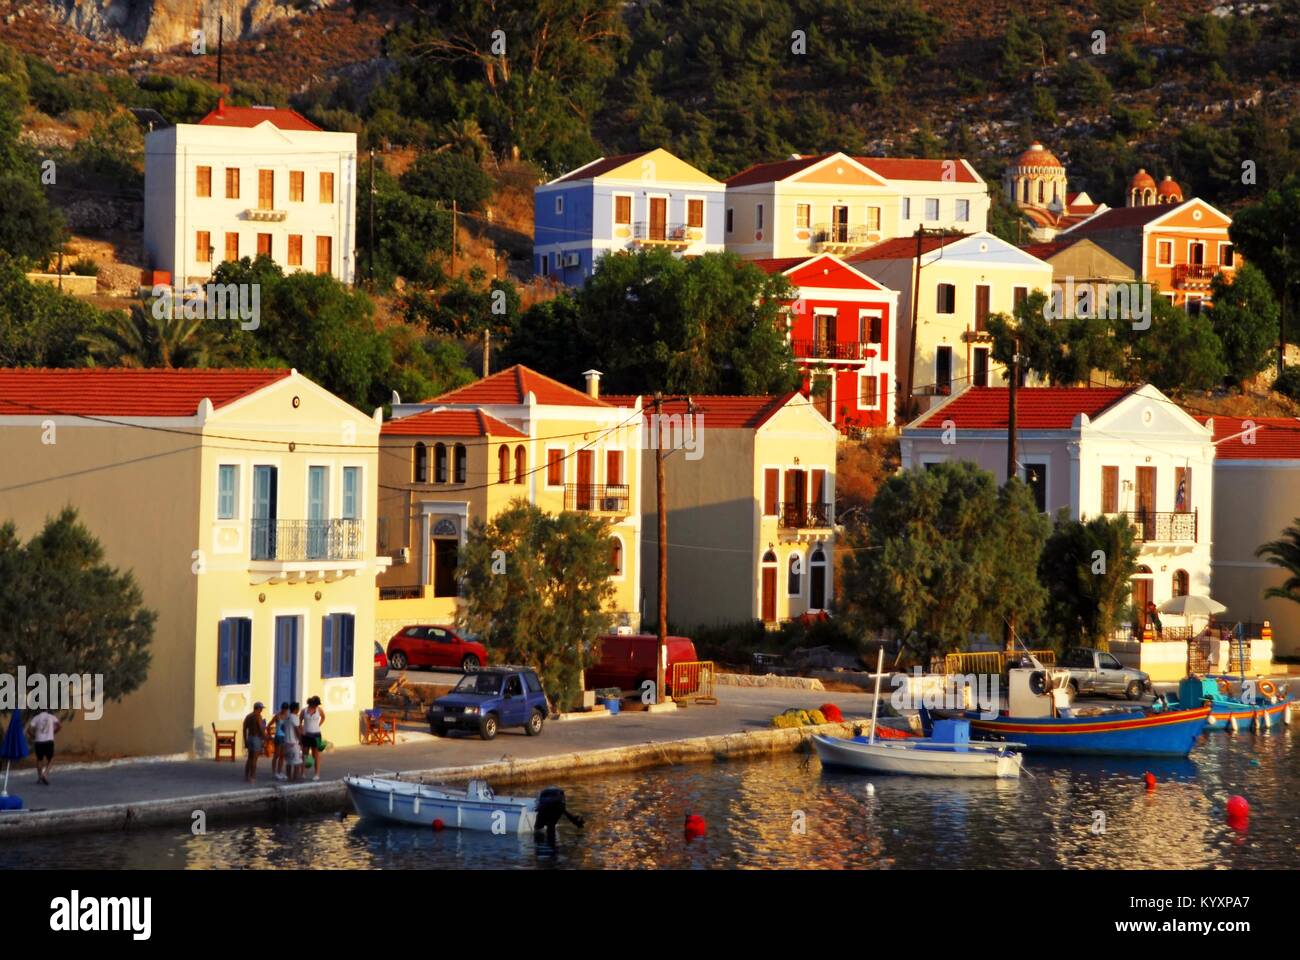 View of the harbour of the town of Kastelorizo, Kastelorizo island, Dodecanese islands, Greece. Stock Photo